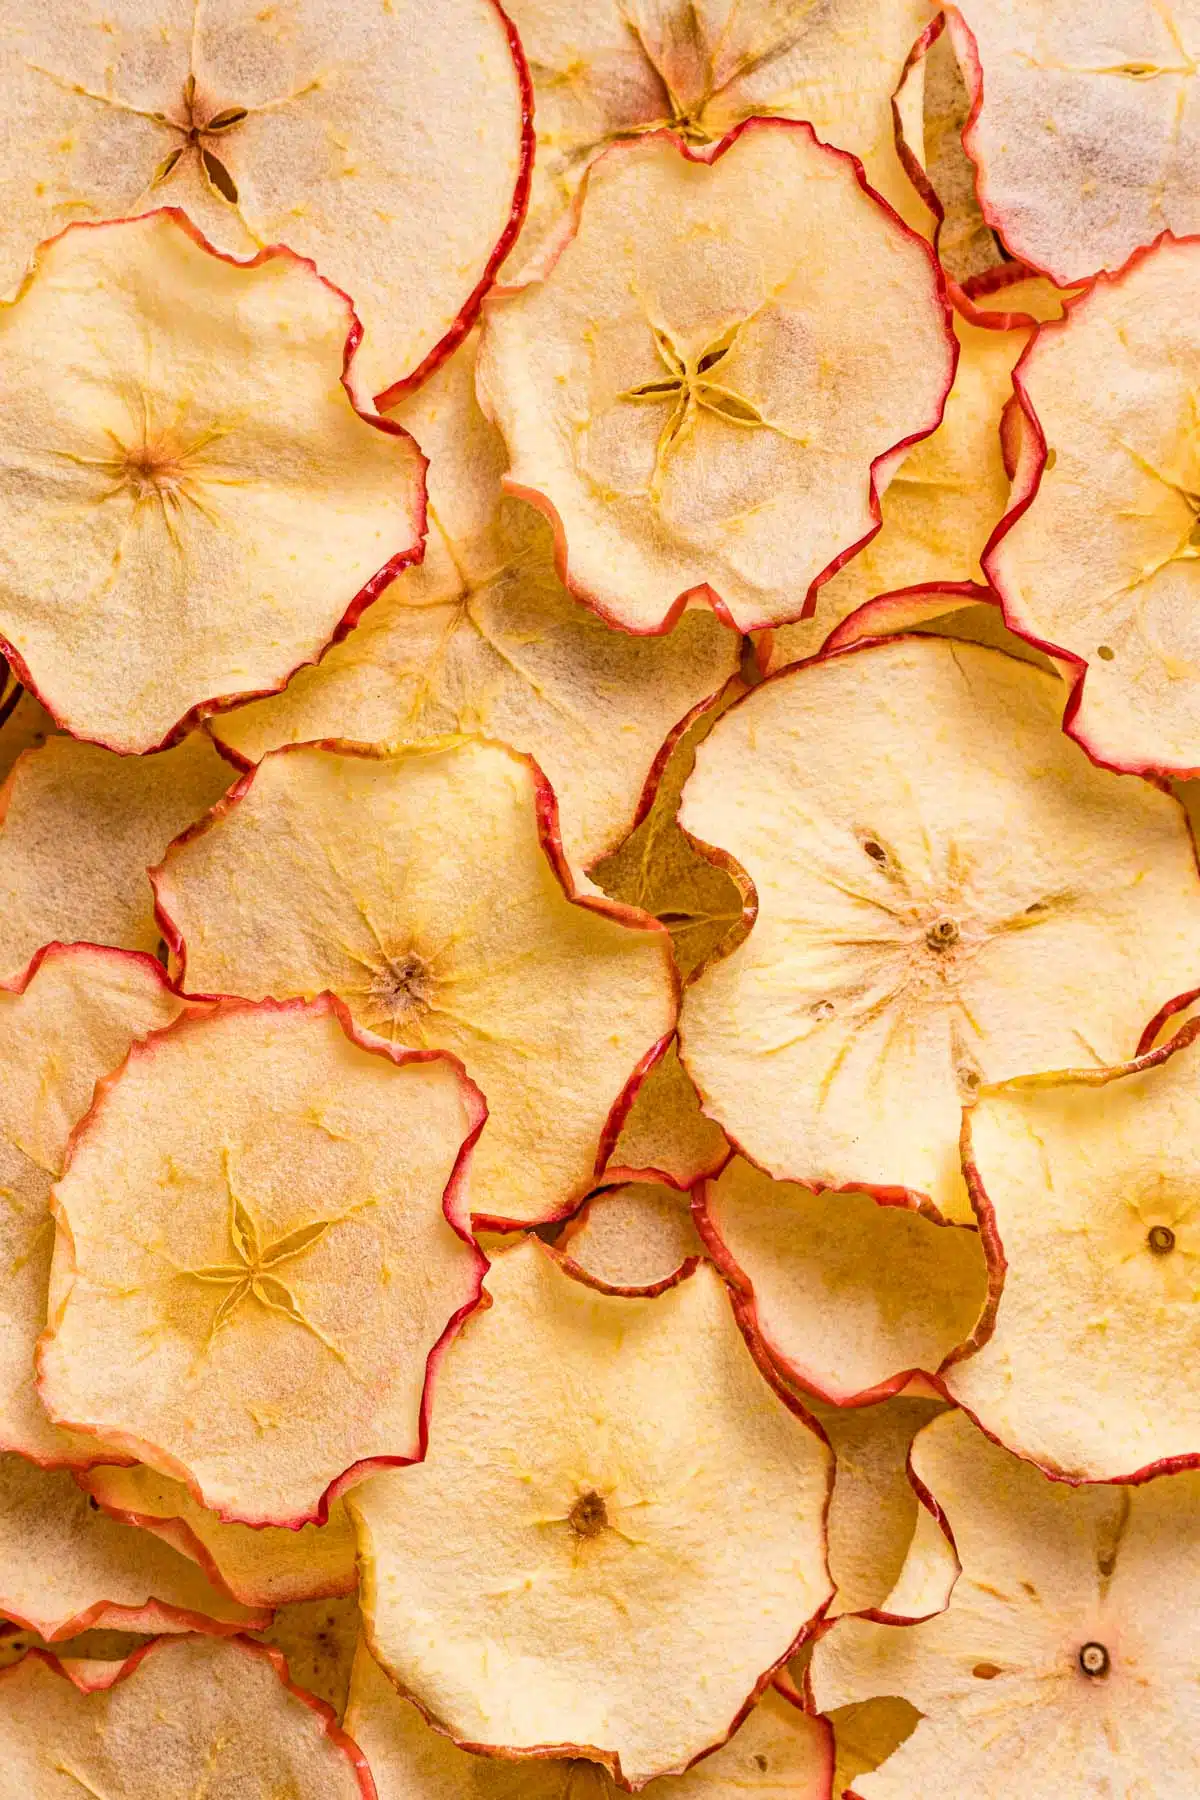 A pile of dried apple chips.